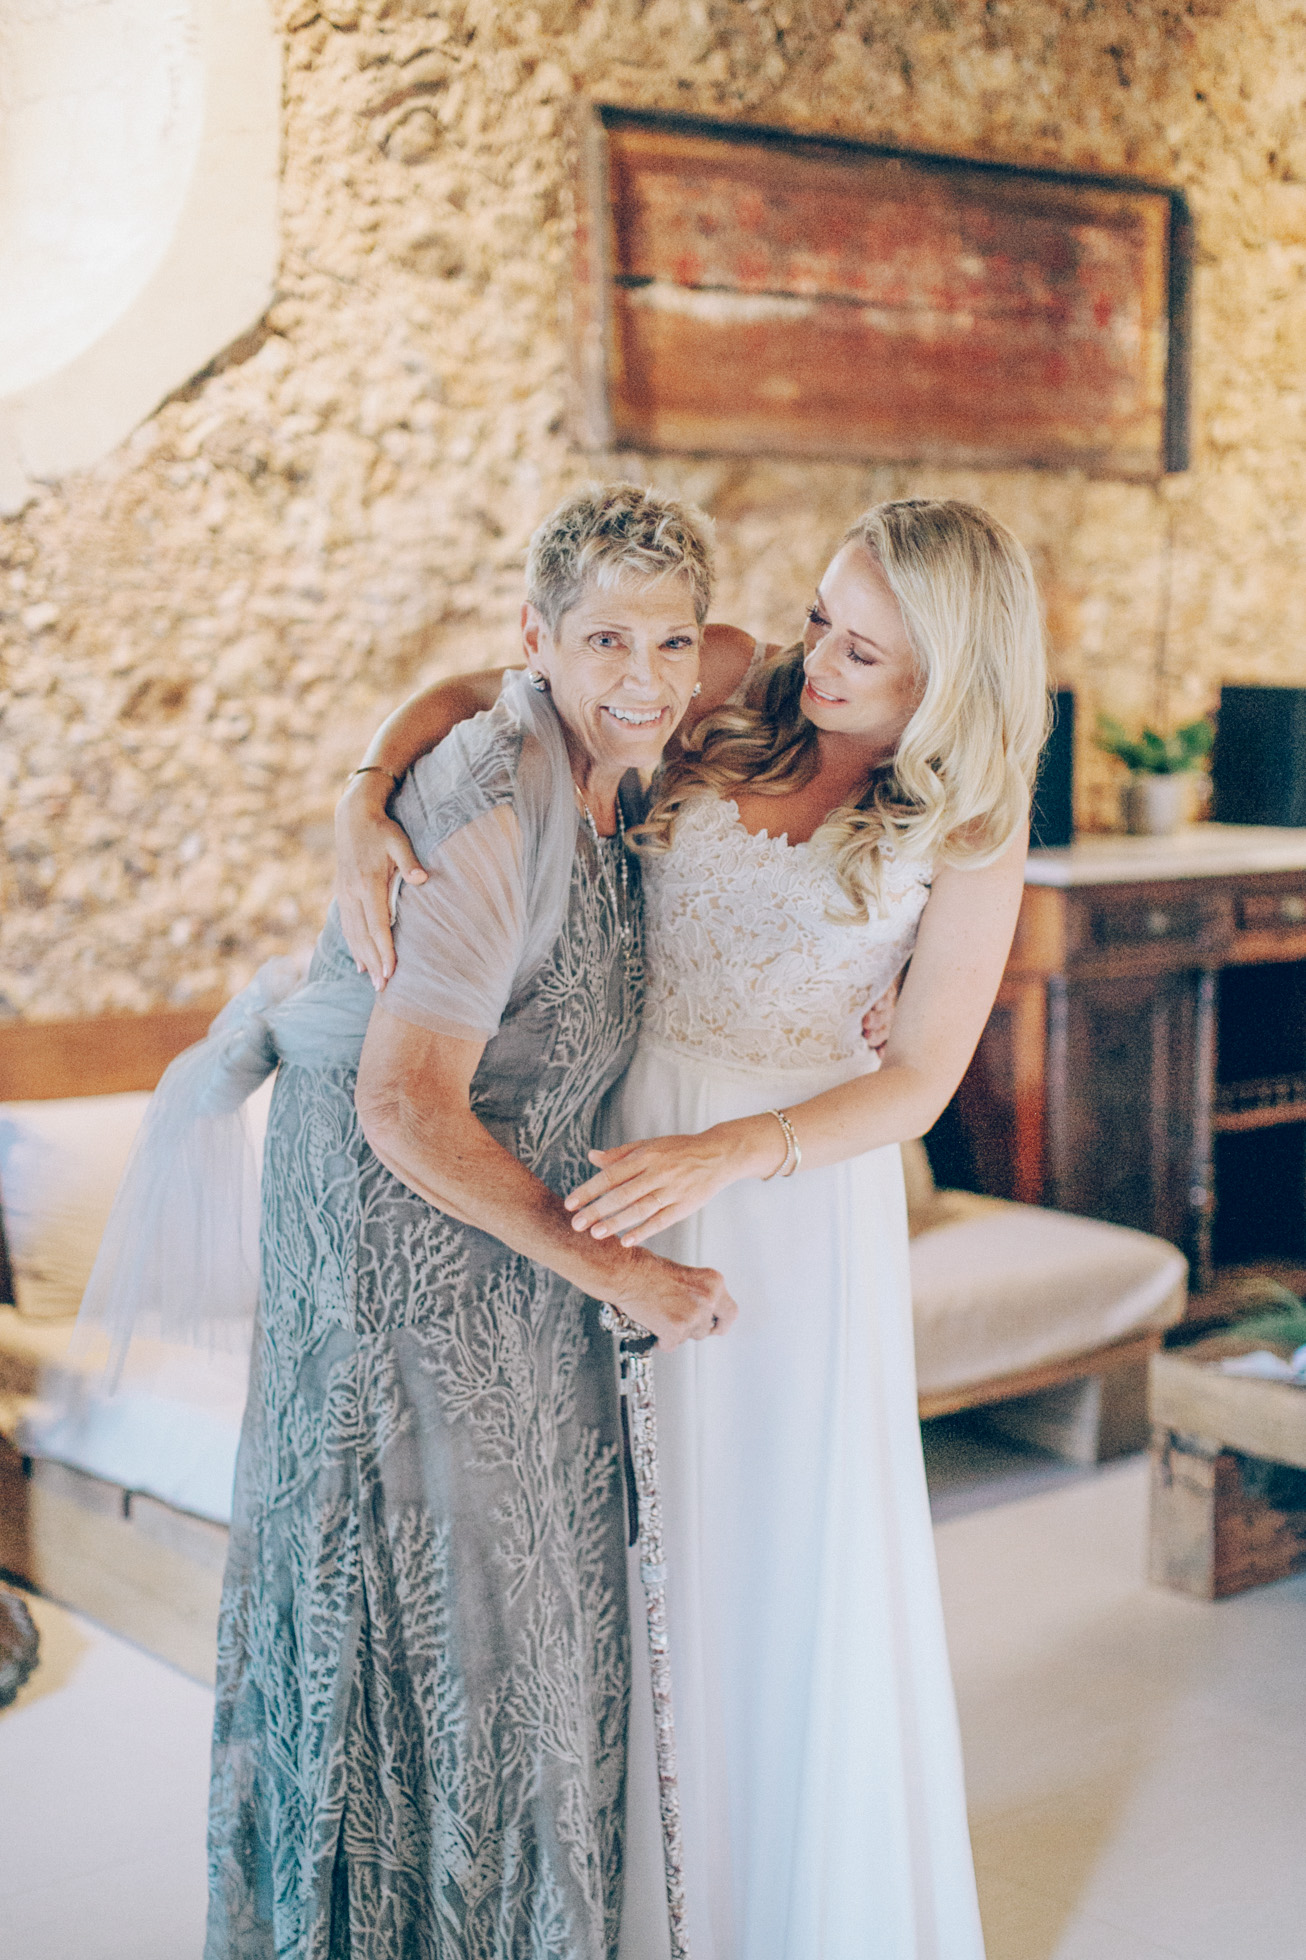 Beautiful bride with her mother posing for the wedding photographer on a summer wedding day in Chania, Crete.